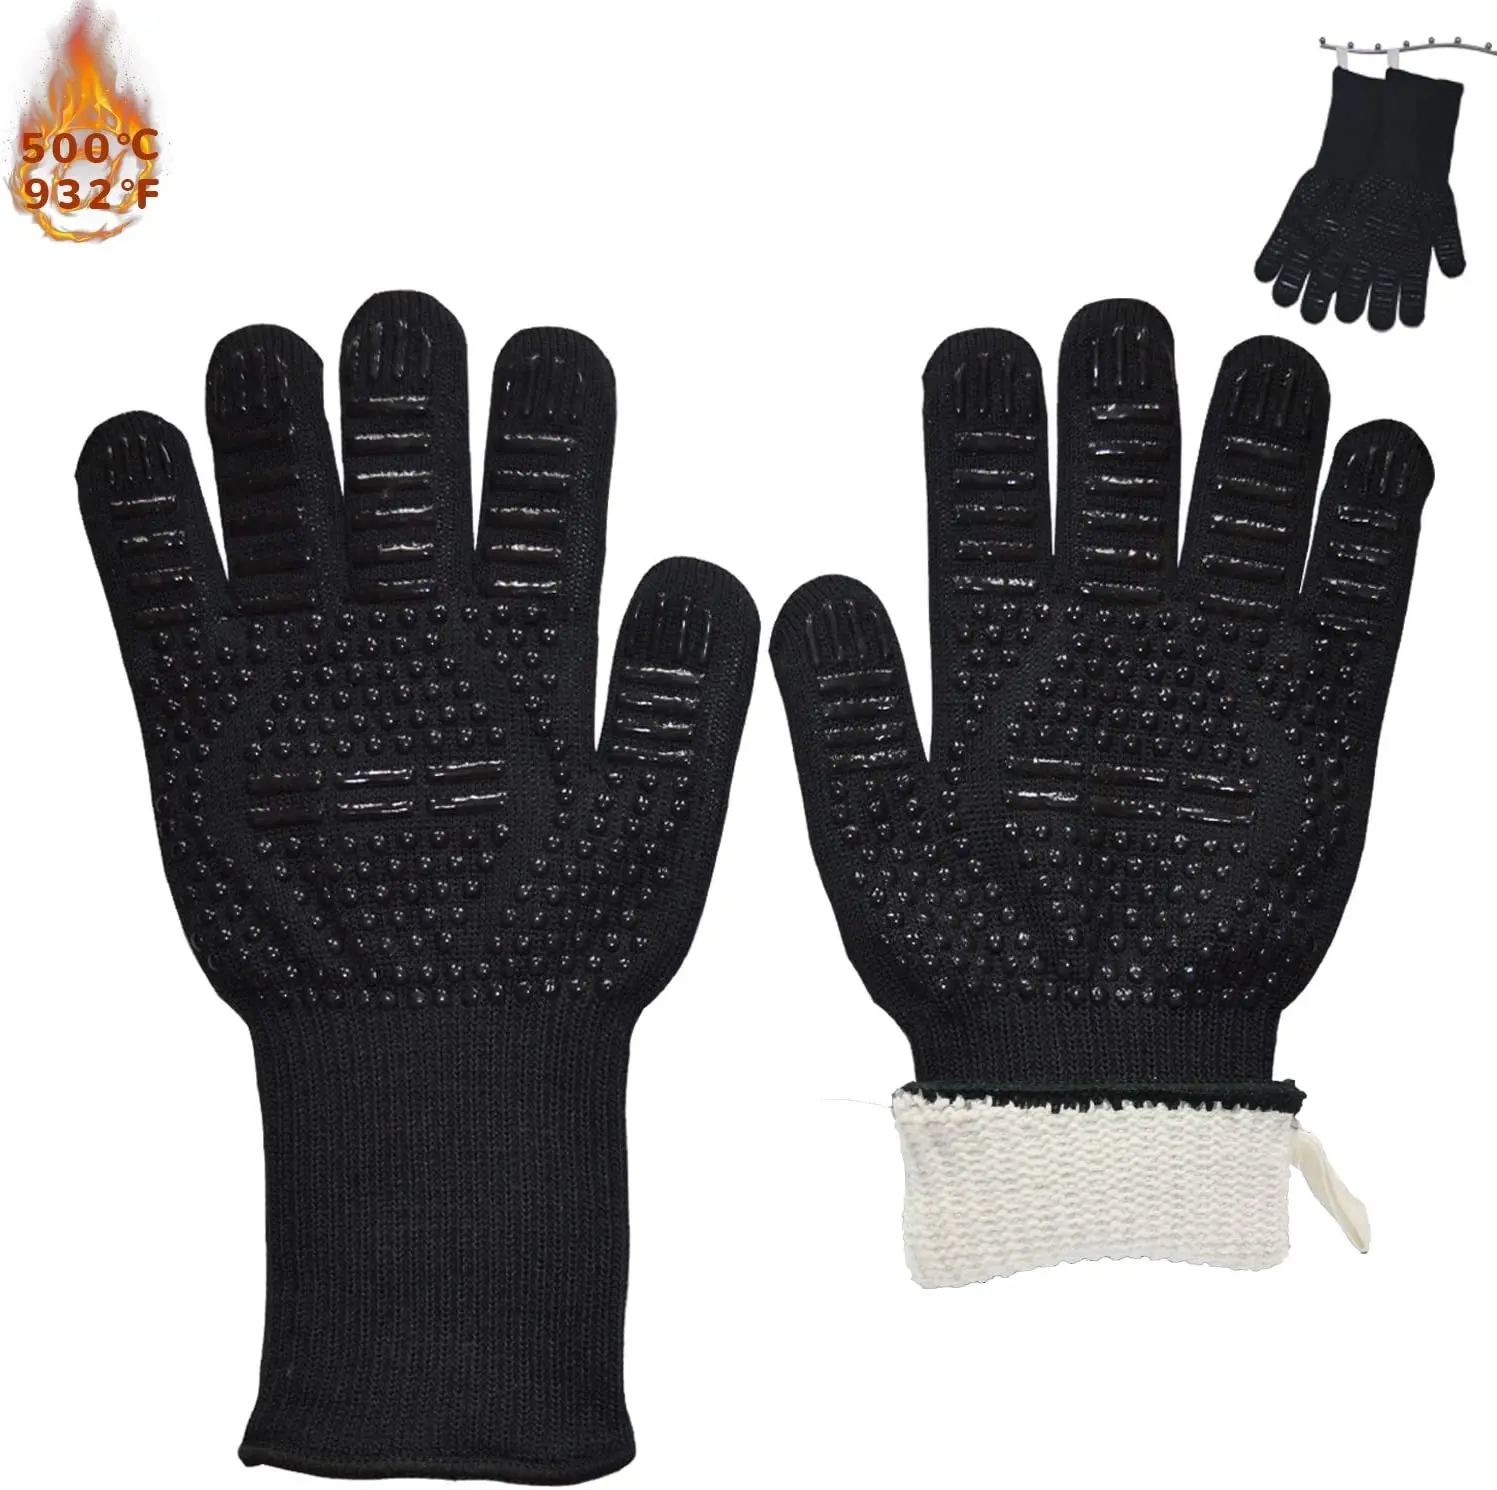 Sublimation Heat Resistant Oven Grill Gloves With Silicone Bumps - Buy ...